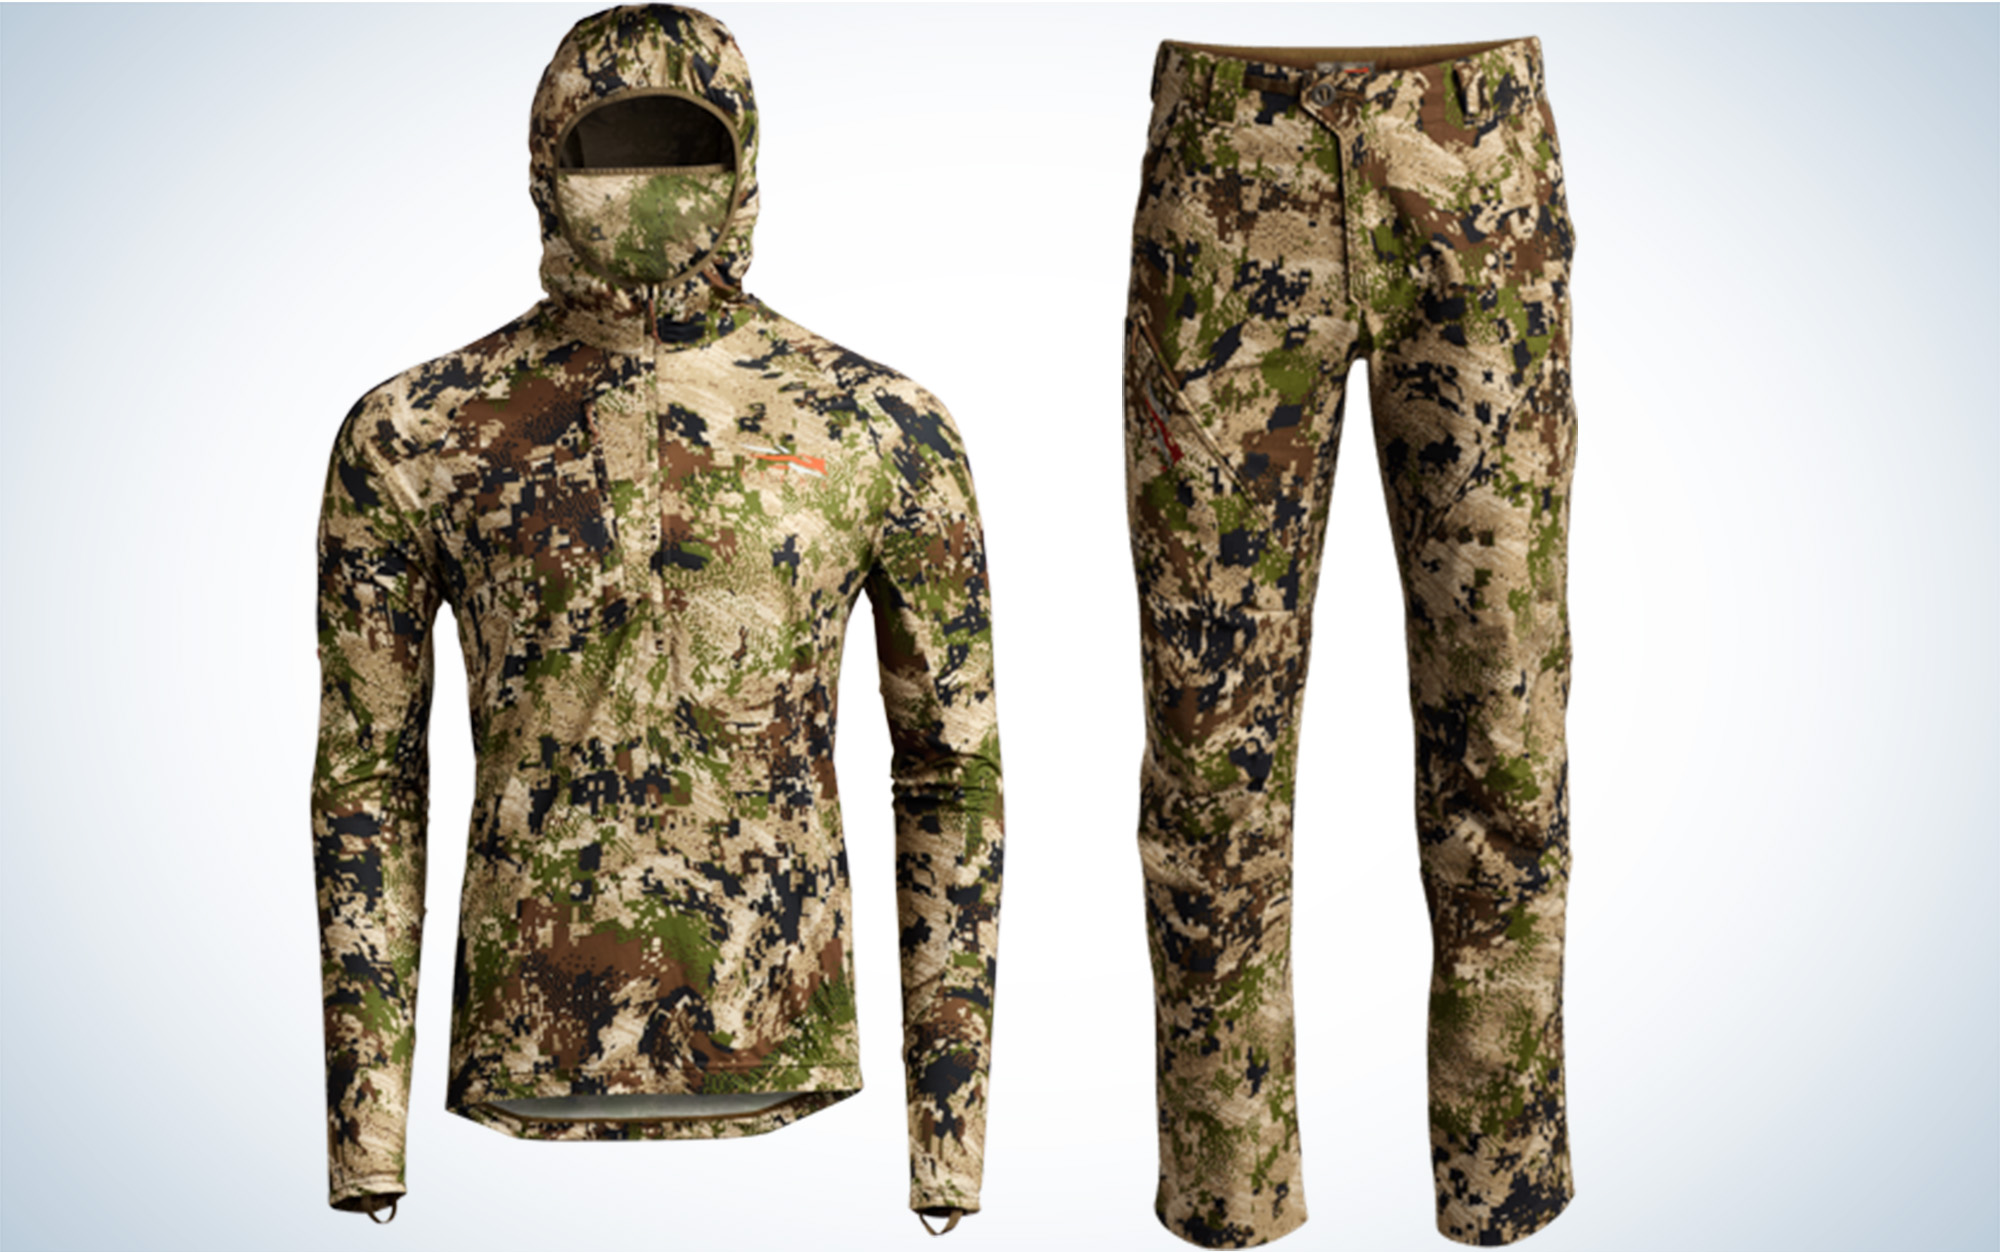 The SITKA Equinox Guard Clothing System is one of the best way to repel insects while turkey hunting.